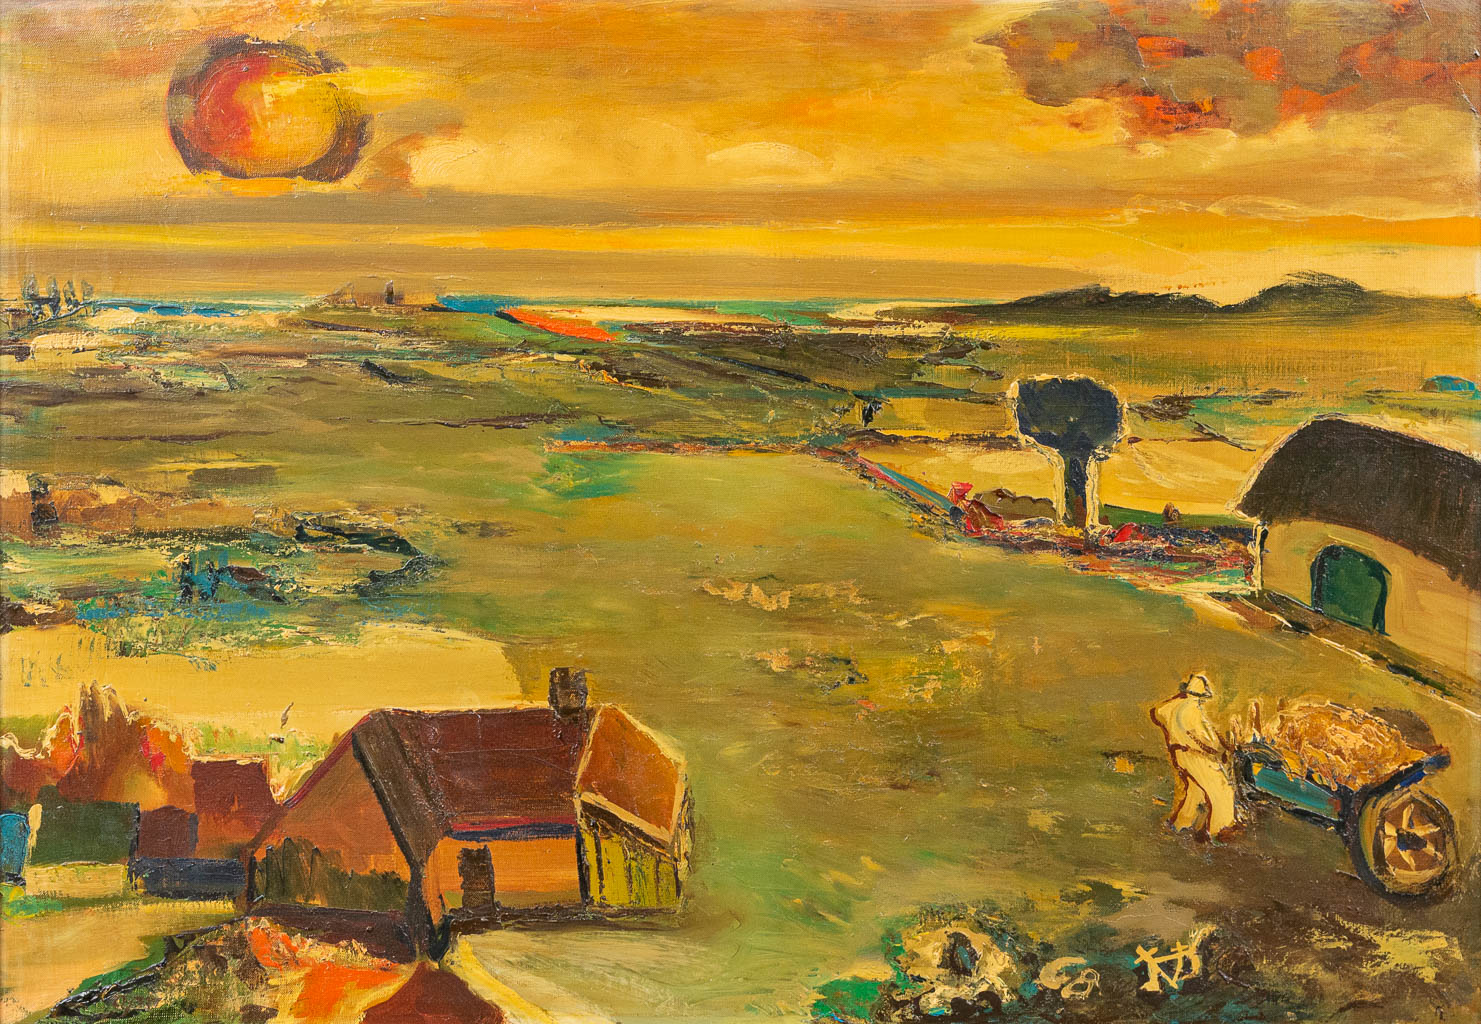 Gaston THEUNINCK (1900-1977) 'Markhoven' a painting, oil on canvas. (100 x 70 cm)